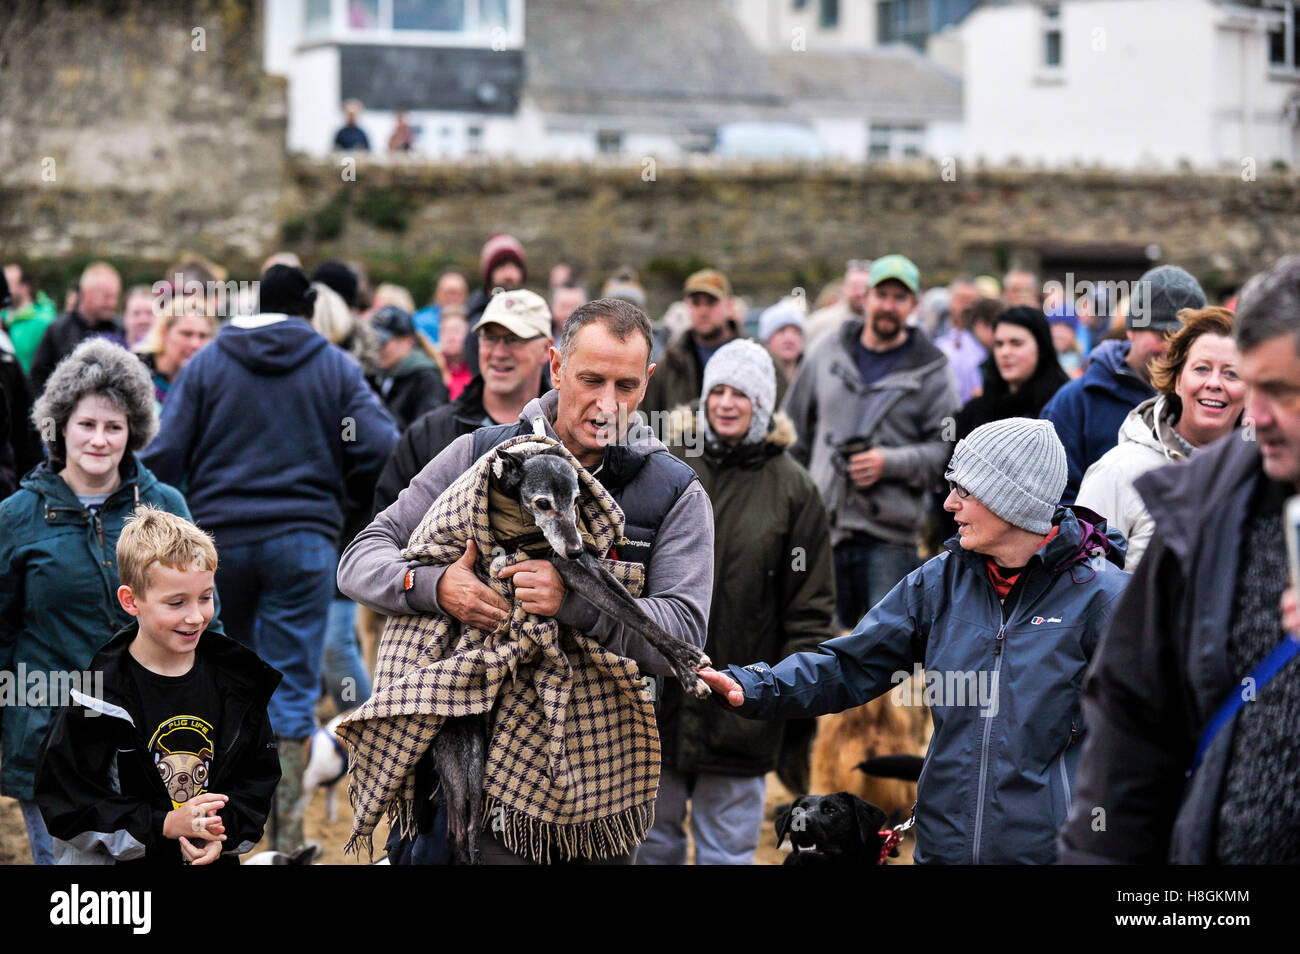 North Beach; Newquay, Cornwall. 12th November, 2016.  Hundreds of dog lovers and their pets turn out to celebrate the life of Walnut, an 18 year old whippet, as he takes his final walk on his beloved Porth Beach.   His owner, Mark Woods as had to take the painful decision to have Walnut put to sleep this afternoon but wanted him to have one last walk accompanied by as many dog lovers and their pets as possible.  Photographer: Gordon Scammell/Alamy Live News. Stock Photo